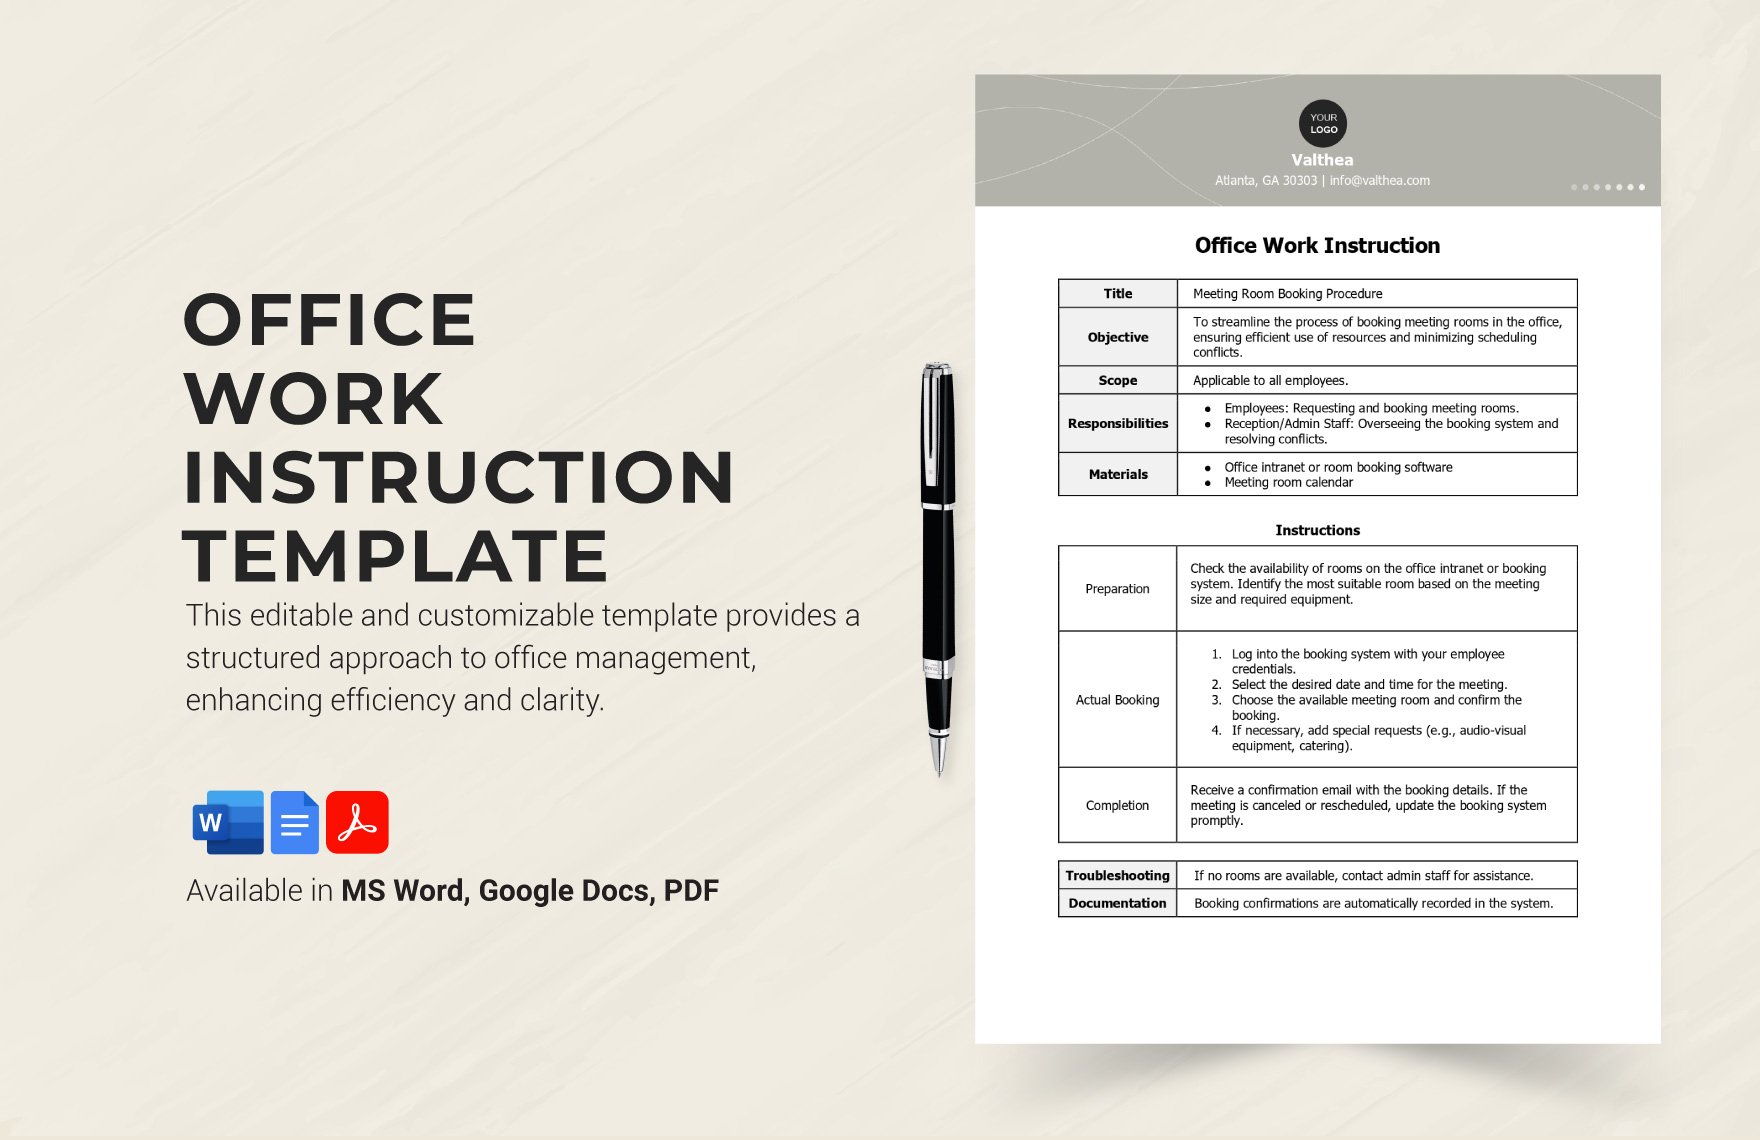 Free Office Work Instruction Template in Word, Google Docs, PDF